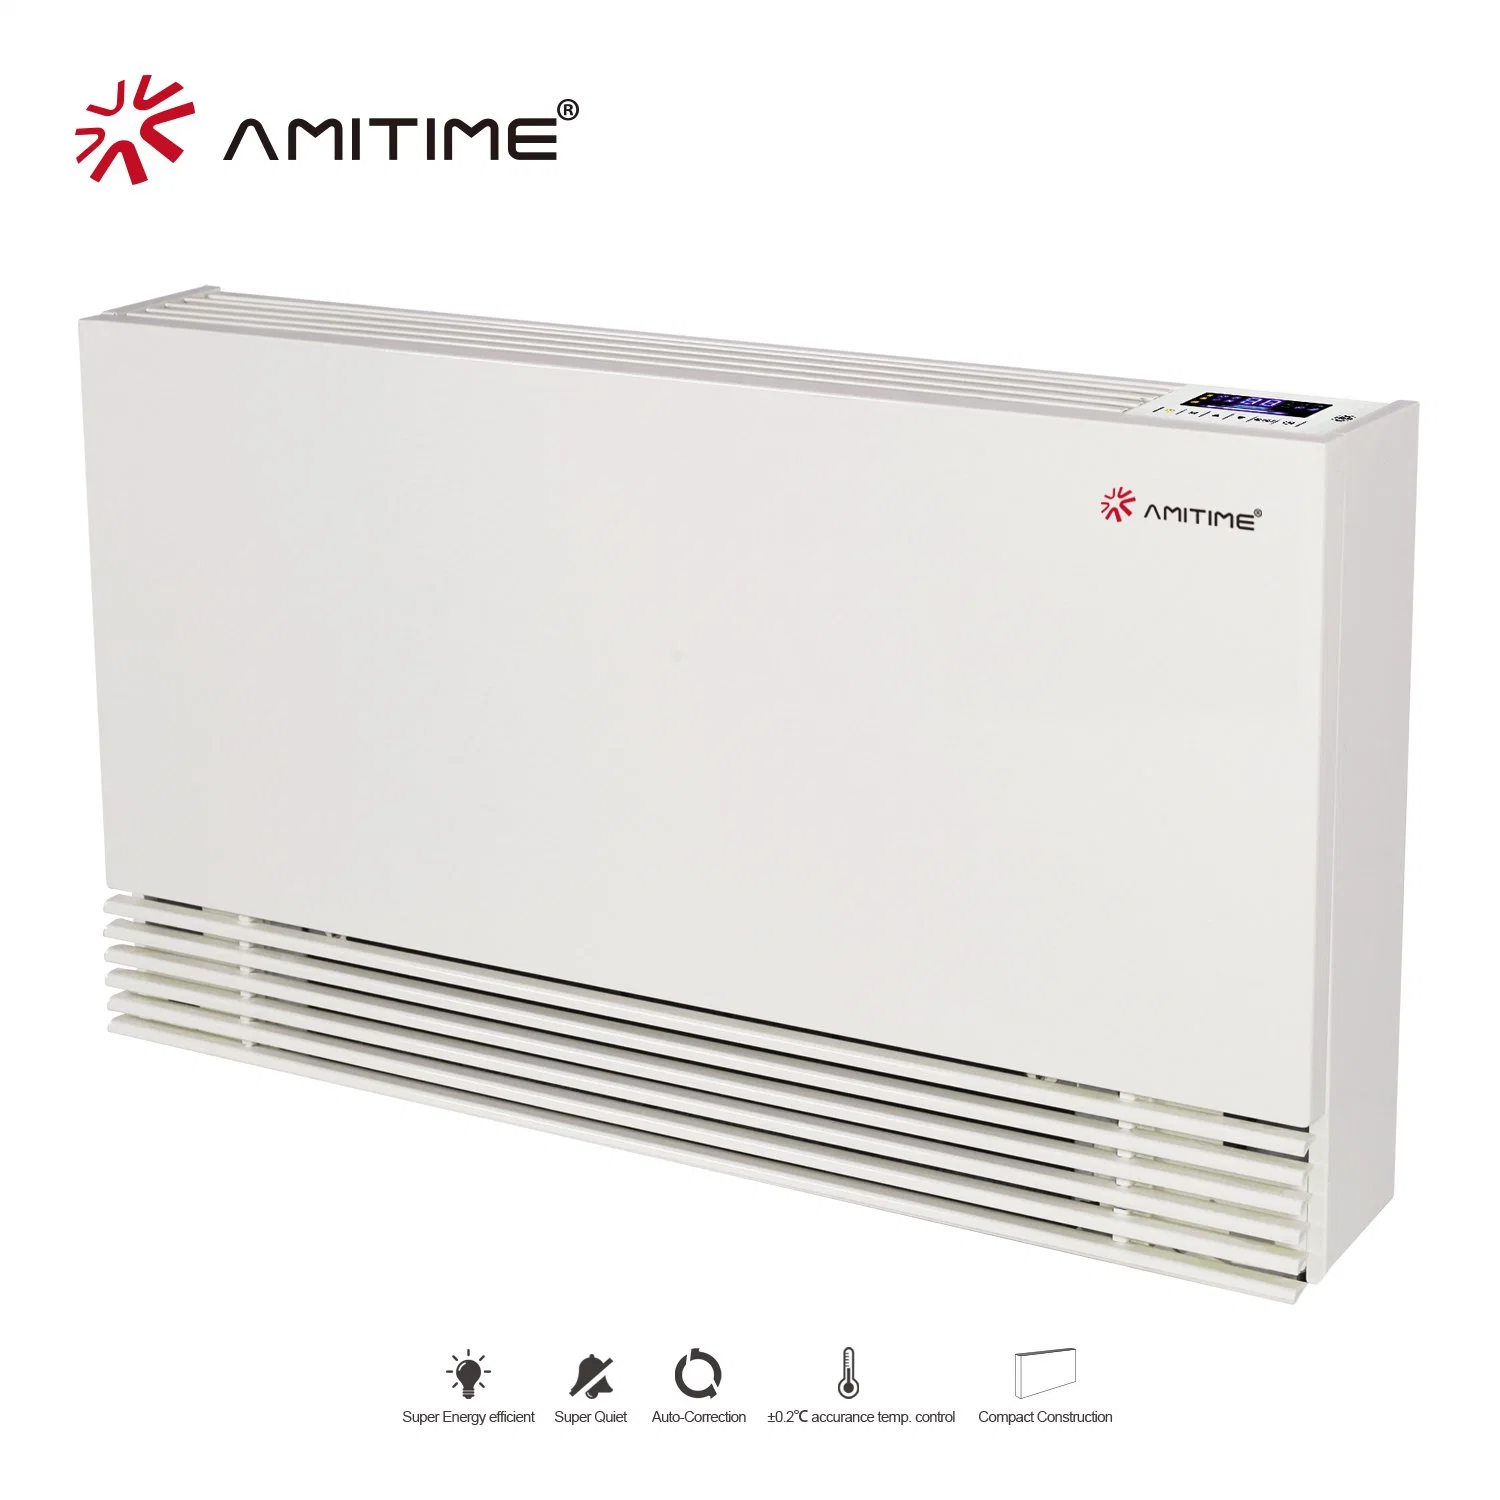 water to RoHS Approved Amitime Carton box cooling system wall mounted